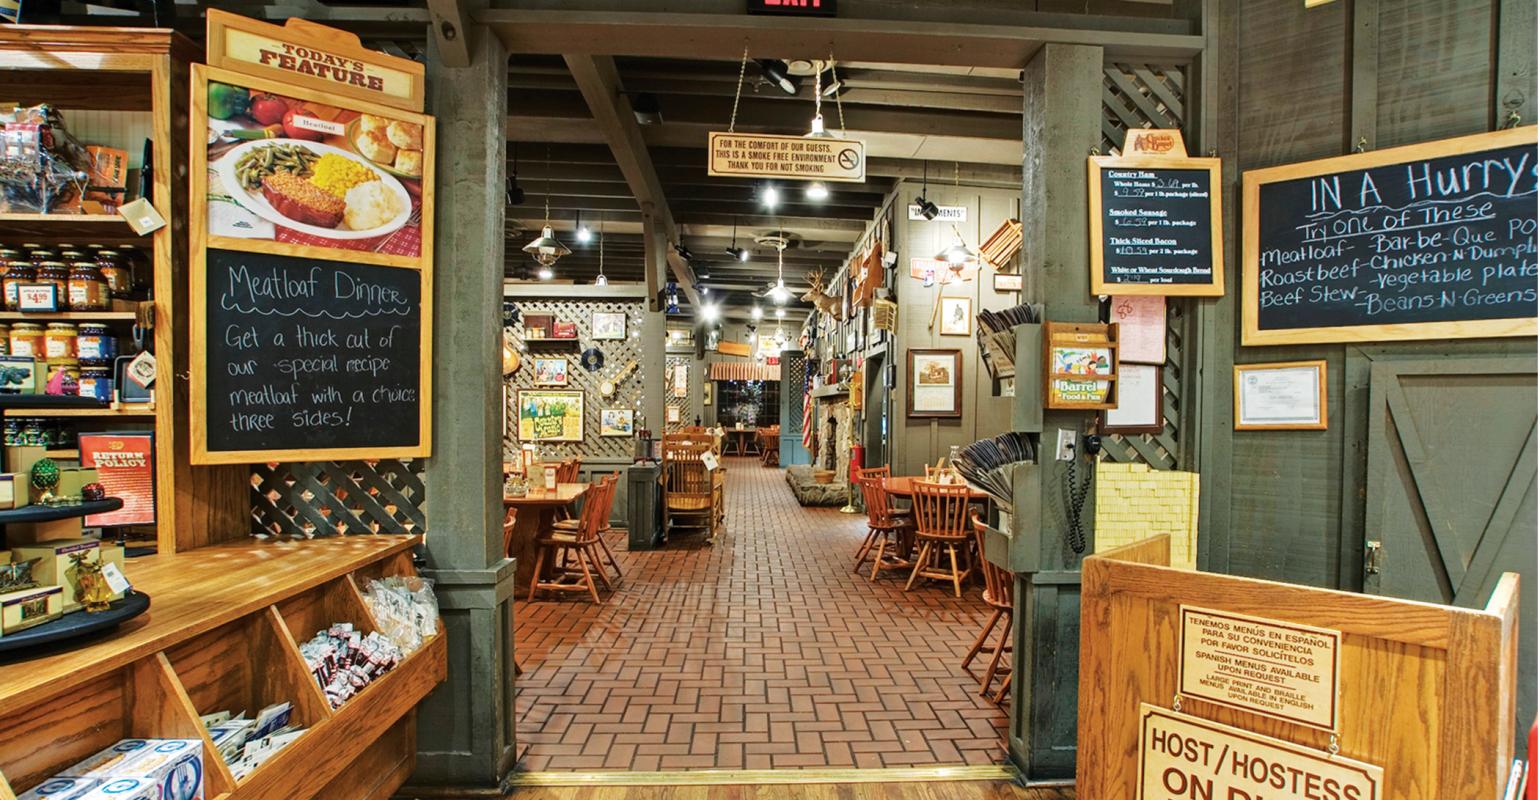 Restaurant, retail combo keeps customers in tune with Cracker Barrel